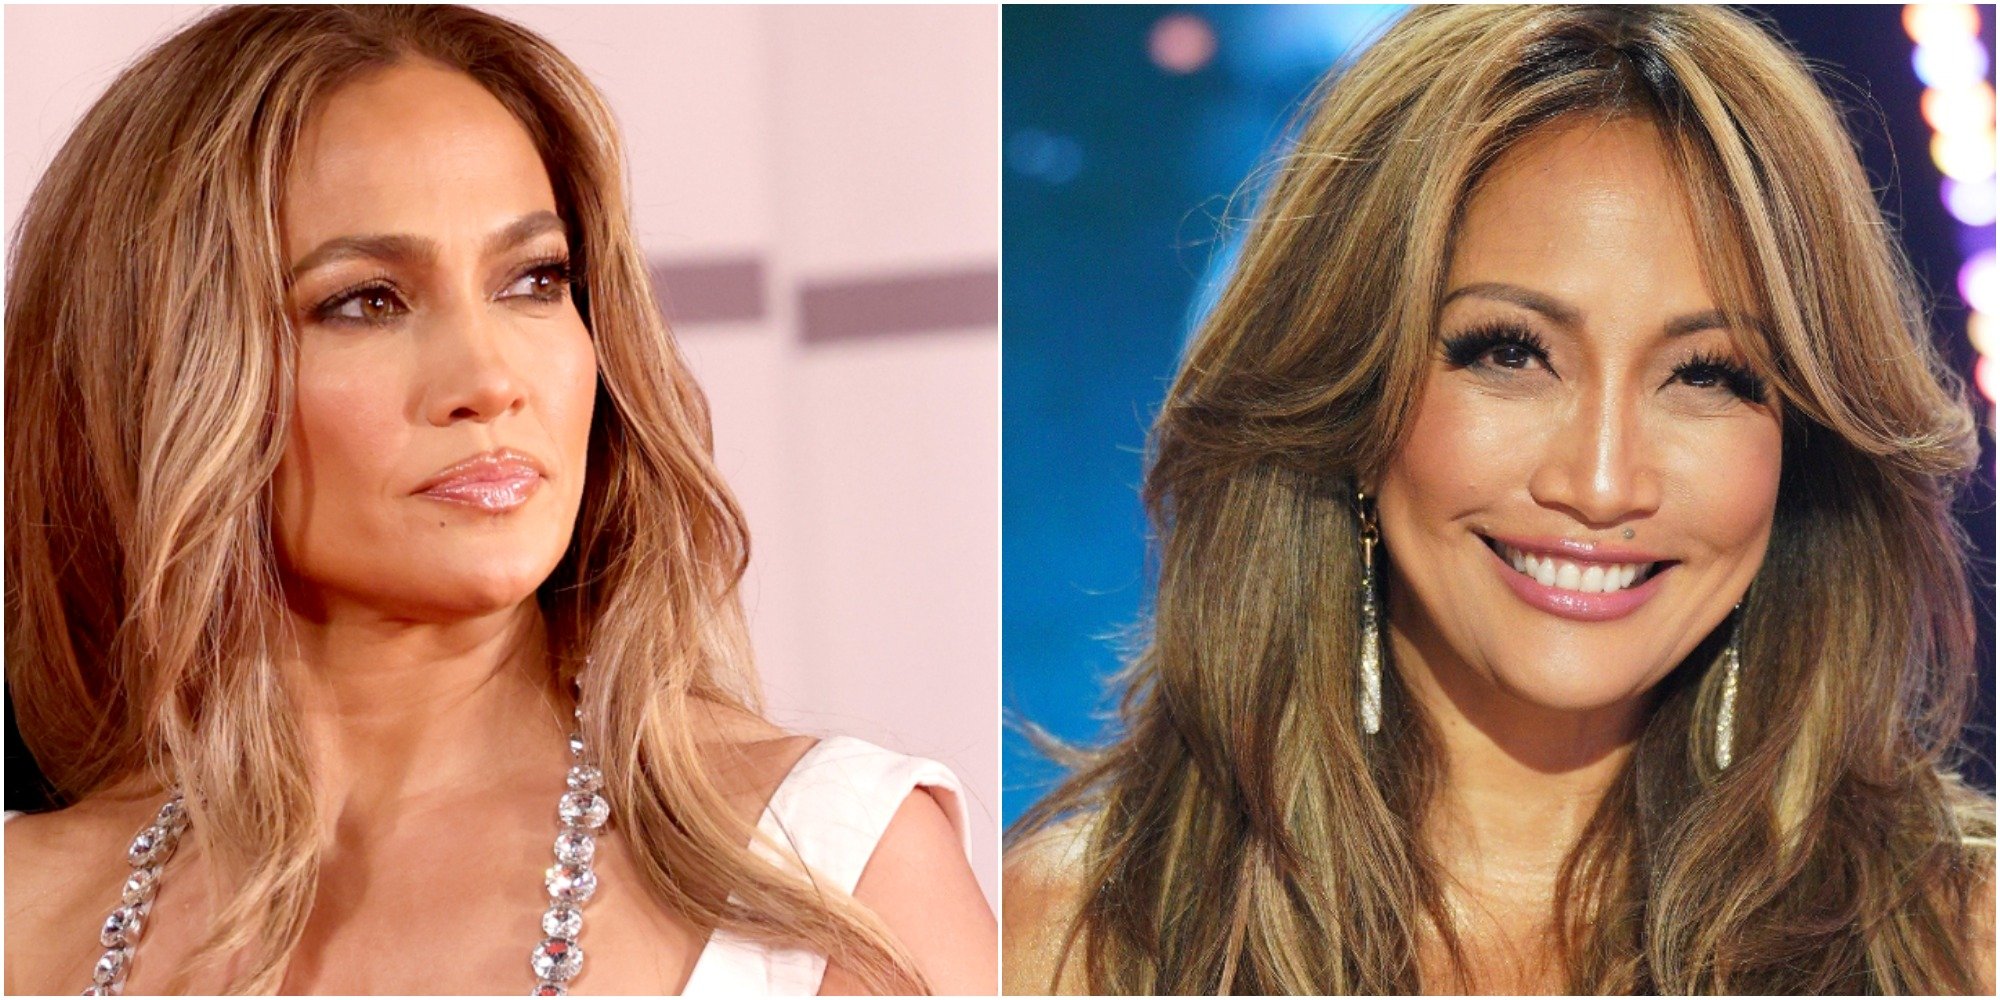 Jennifer Lopez and Carrie Ann Inaba photographed at two separate events.